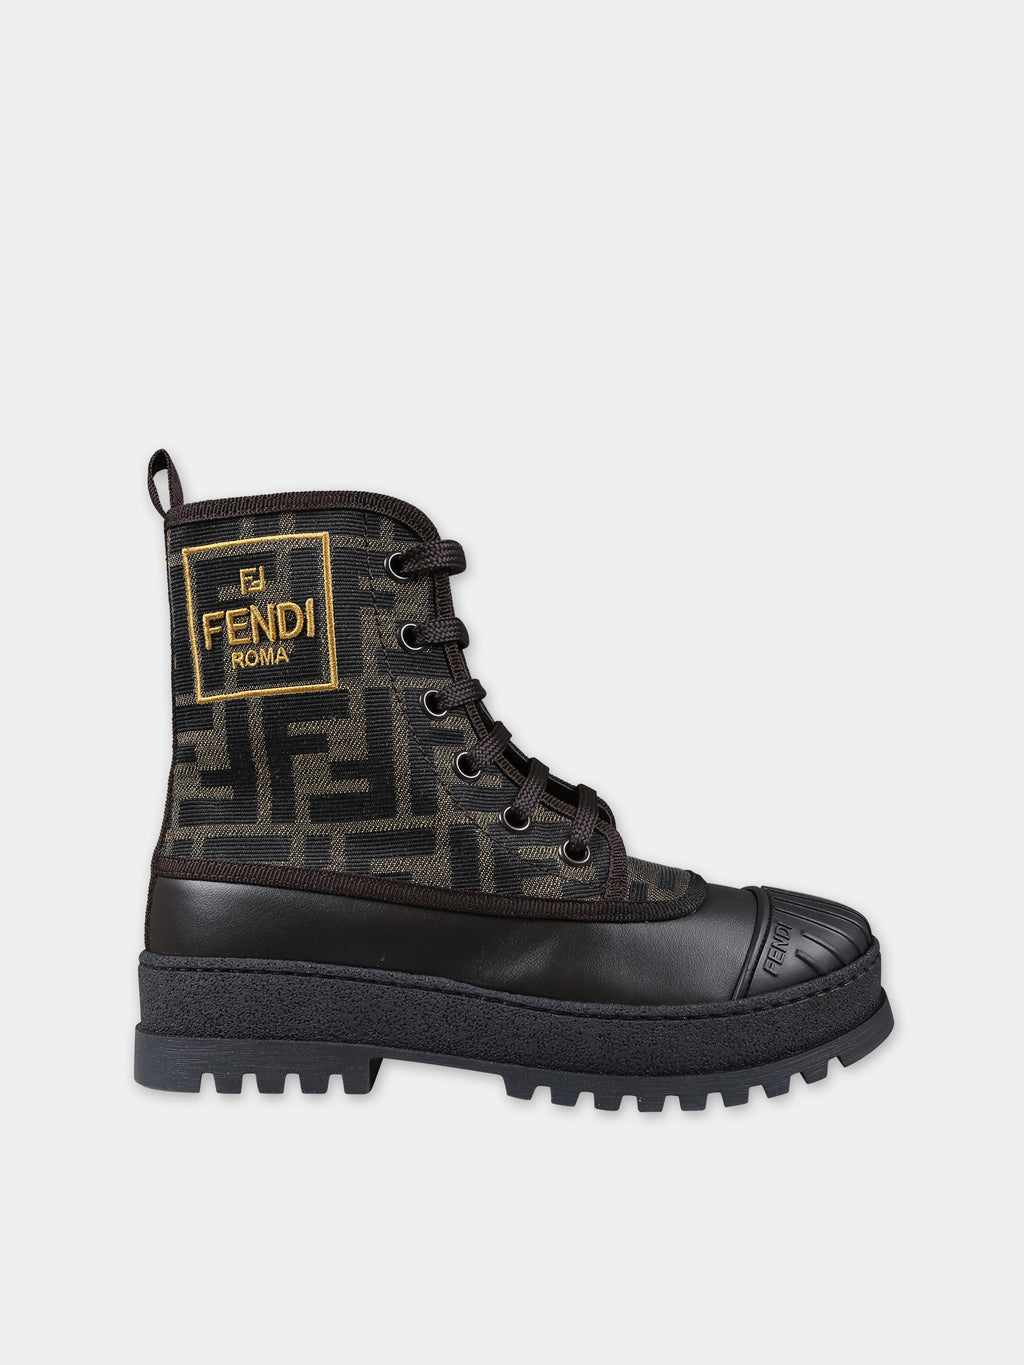 Brown combat boots for kids with FF logo